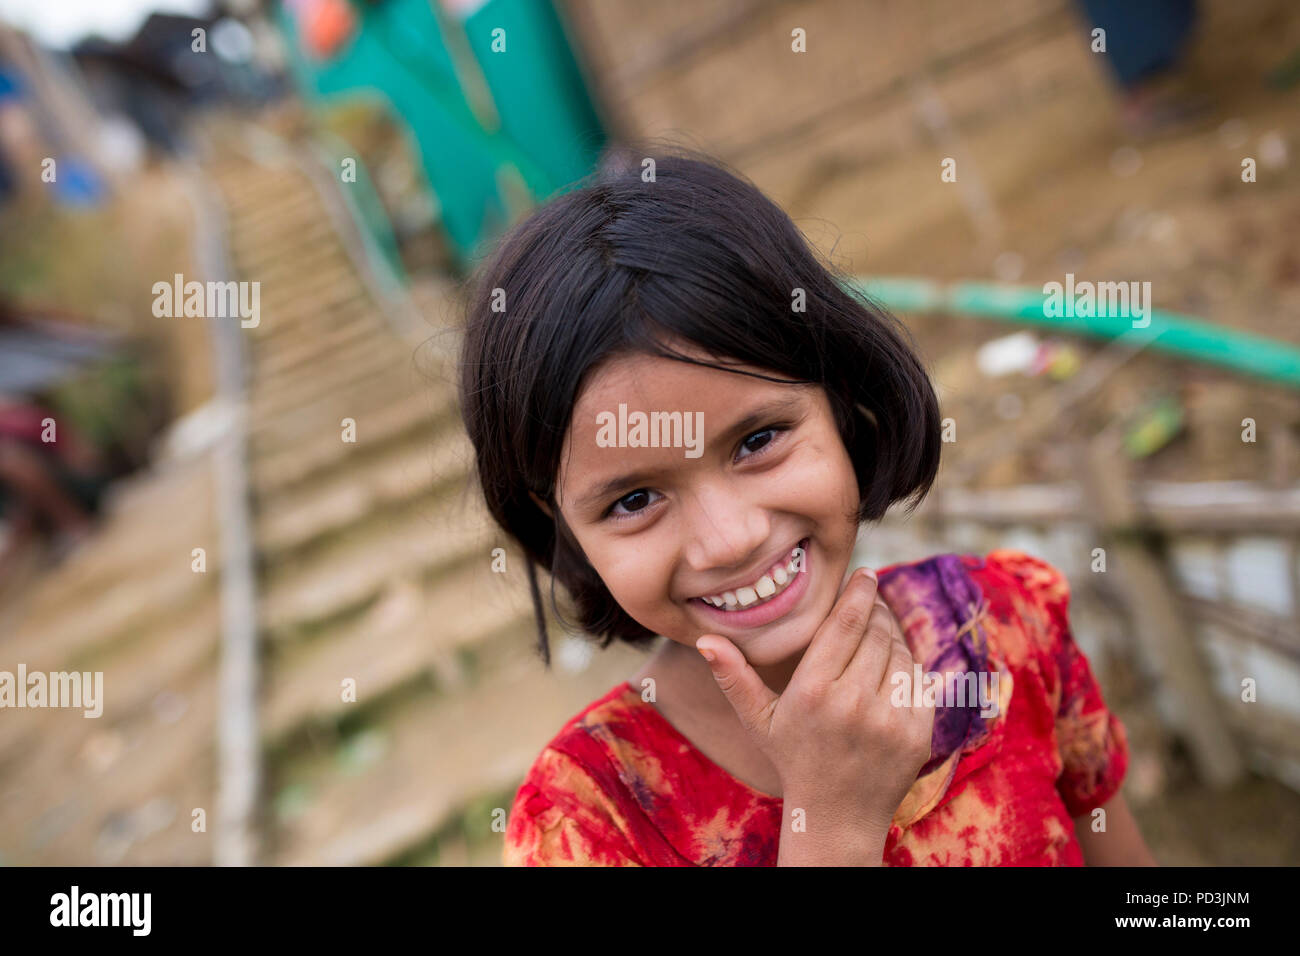 COX'S BAZAR, BANGLADESH - AUGUST 04 : A rohingya child smile inside refugee camp in Cox's Bazar , Bangladesh on August 04, 2018. Stock Photo